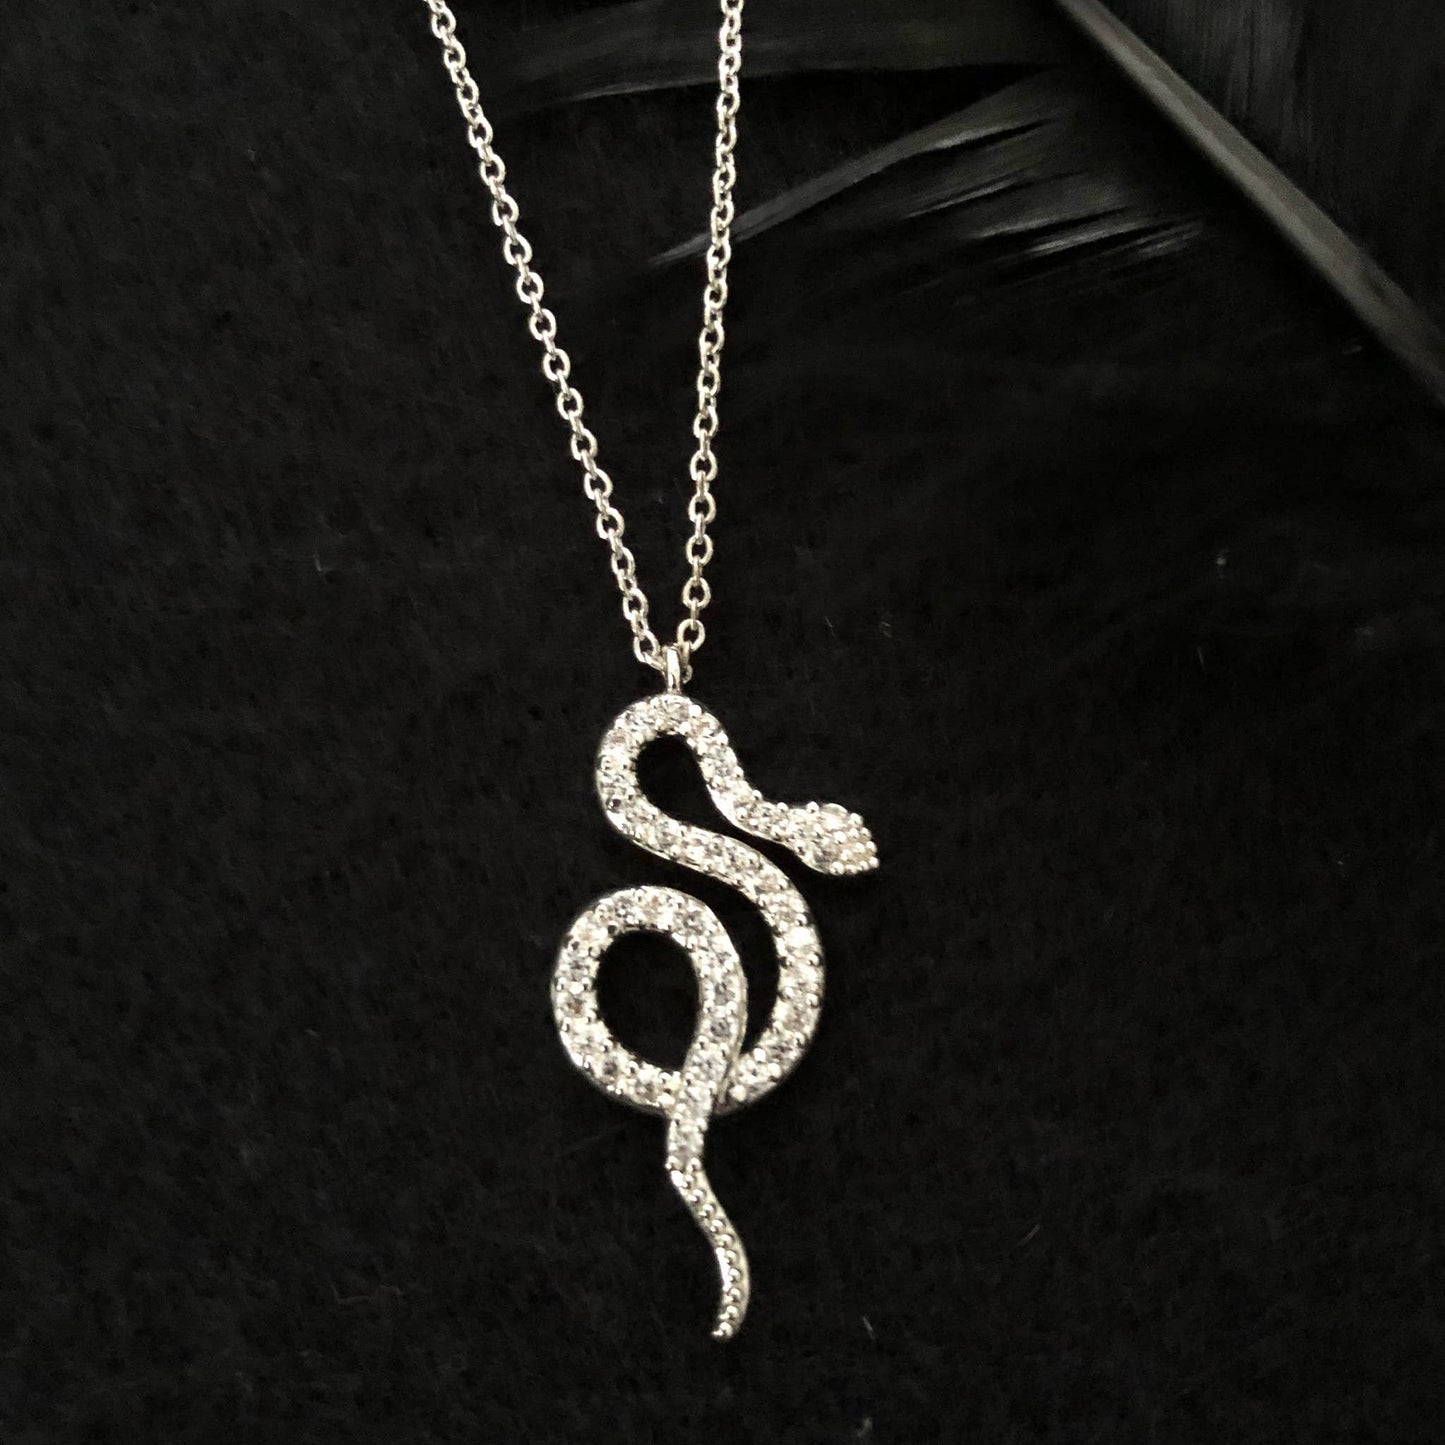 The Snake Charmer Necklace